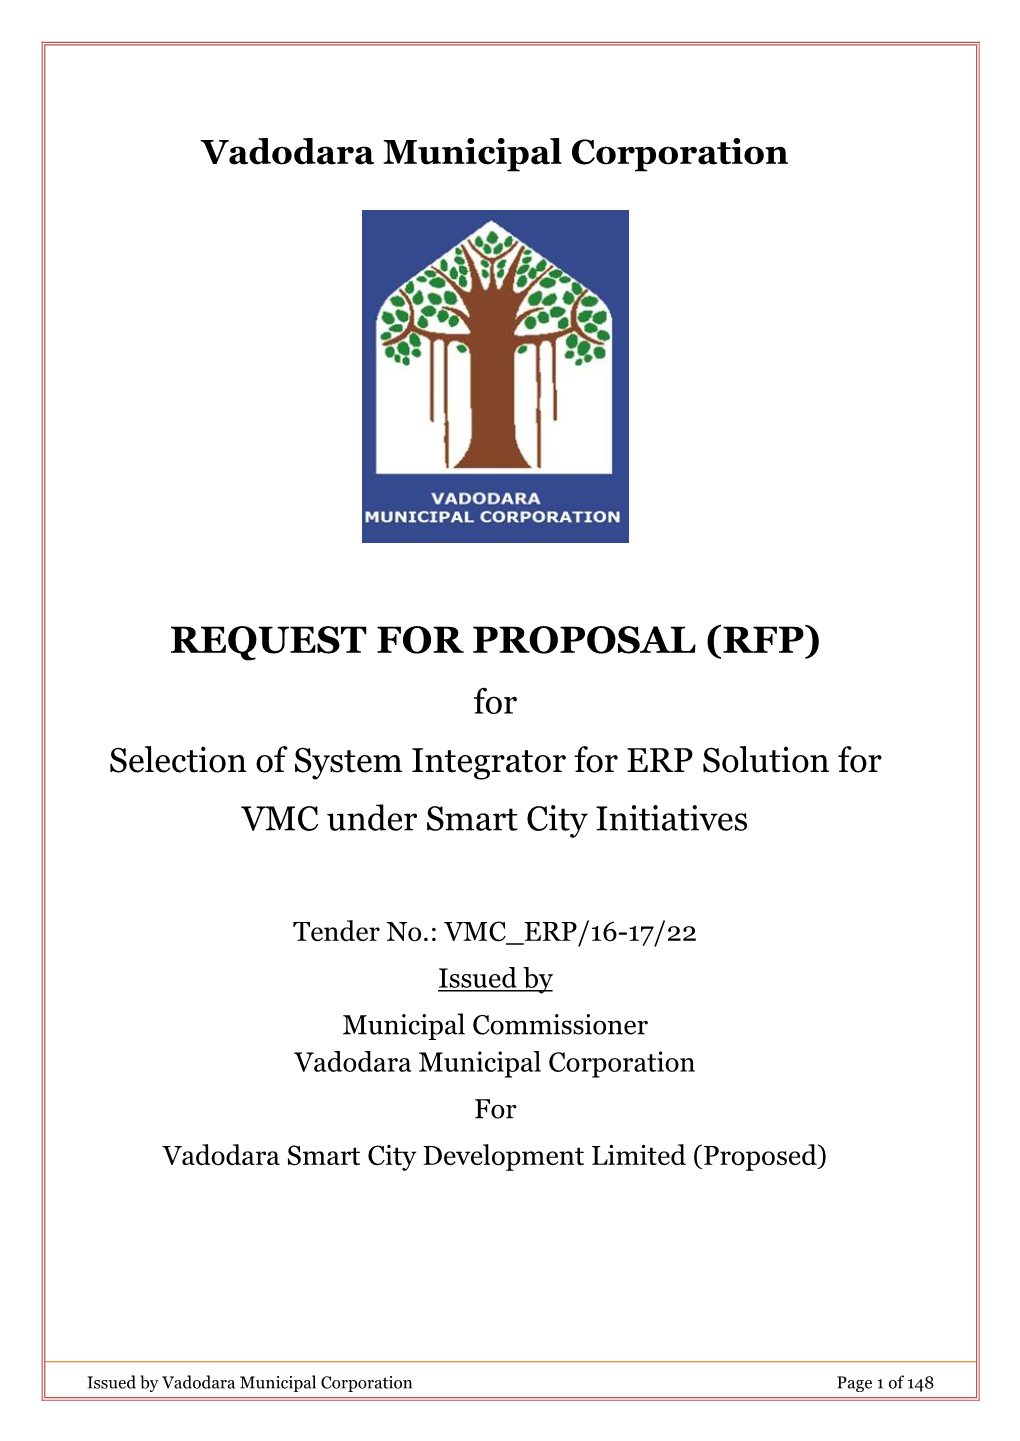 RFP) for Selection of System Integrator for ERP Solution for VMC Under Smart City Initiatives